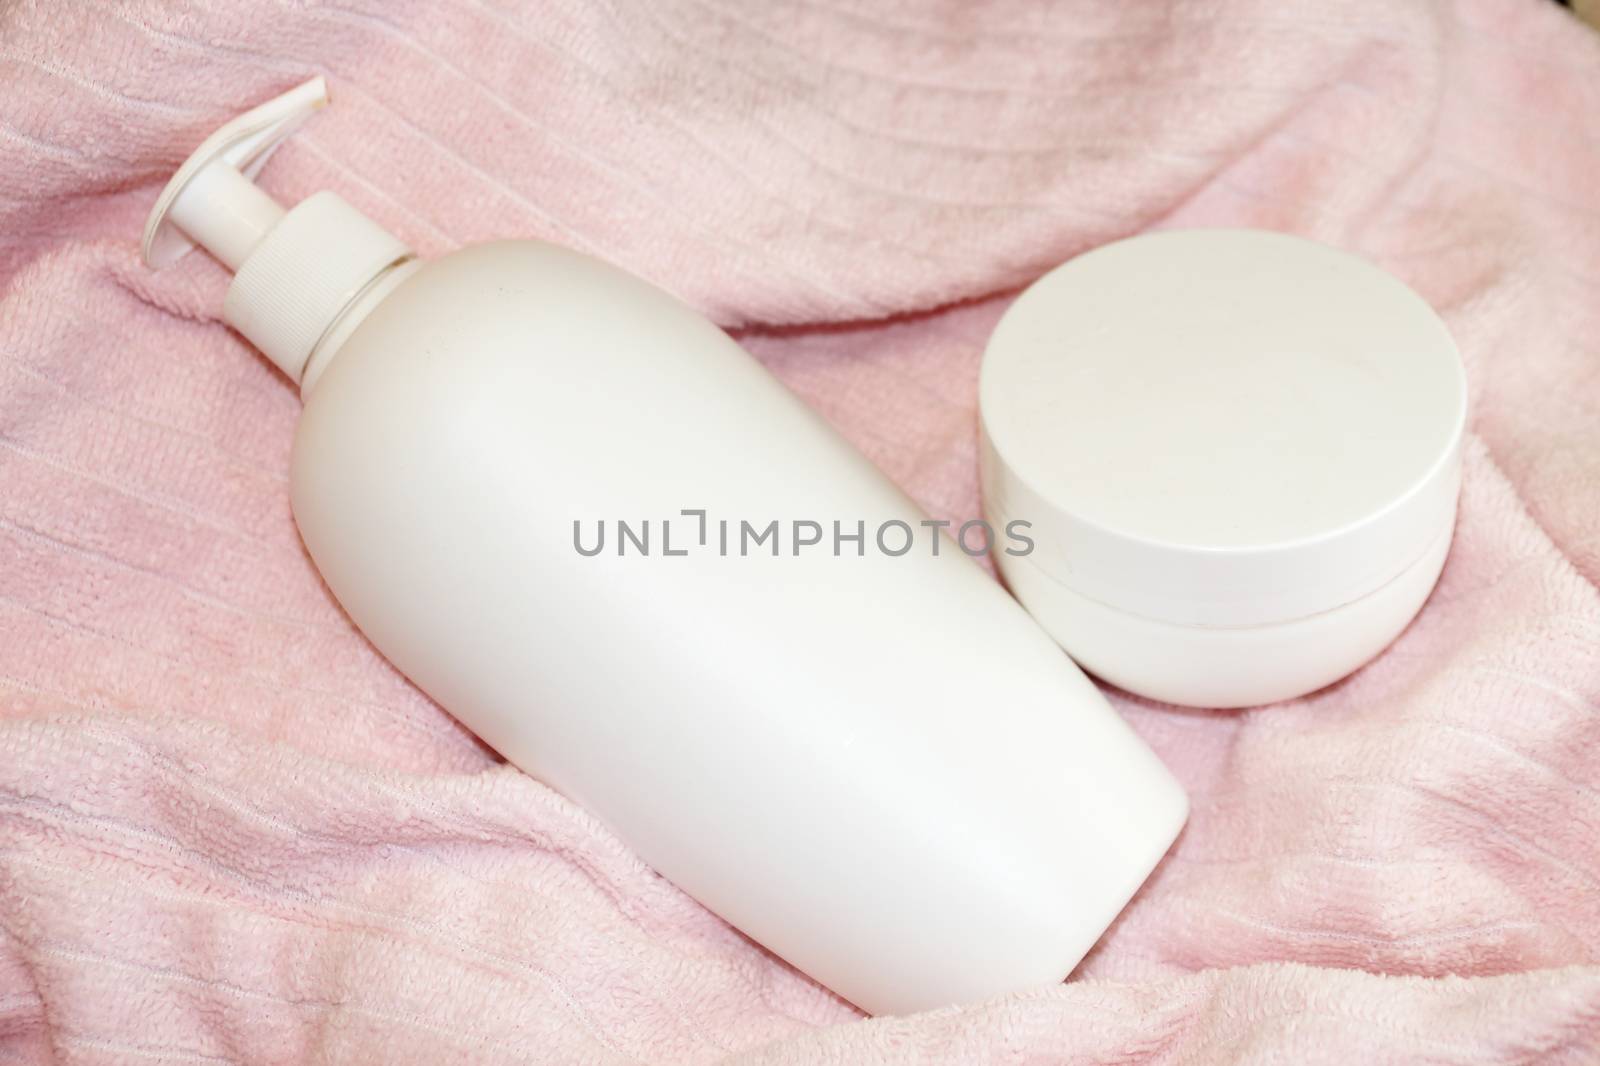 white cosmetic bottle and cream jar on pink terry cloth close up